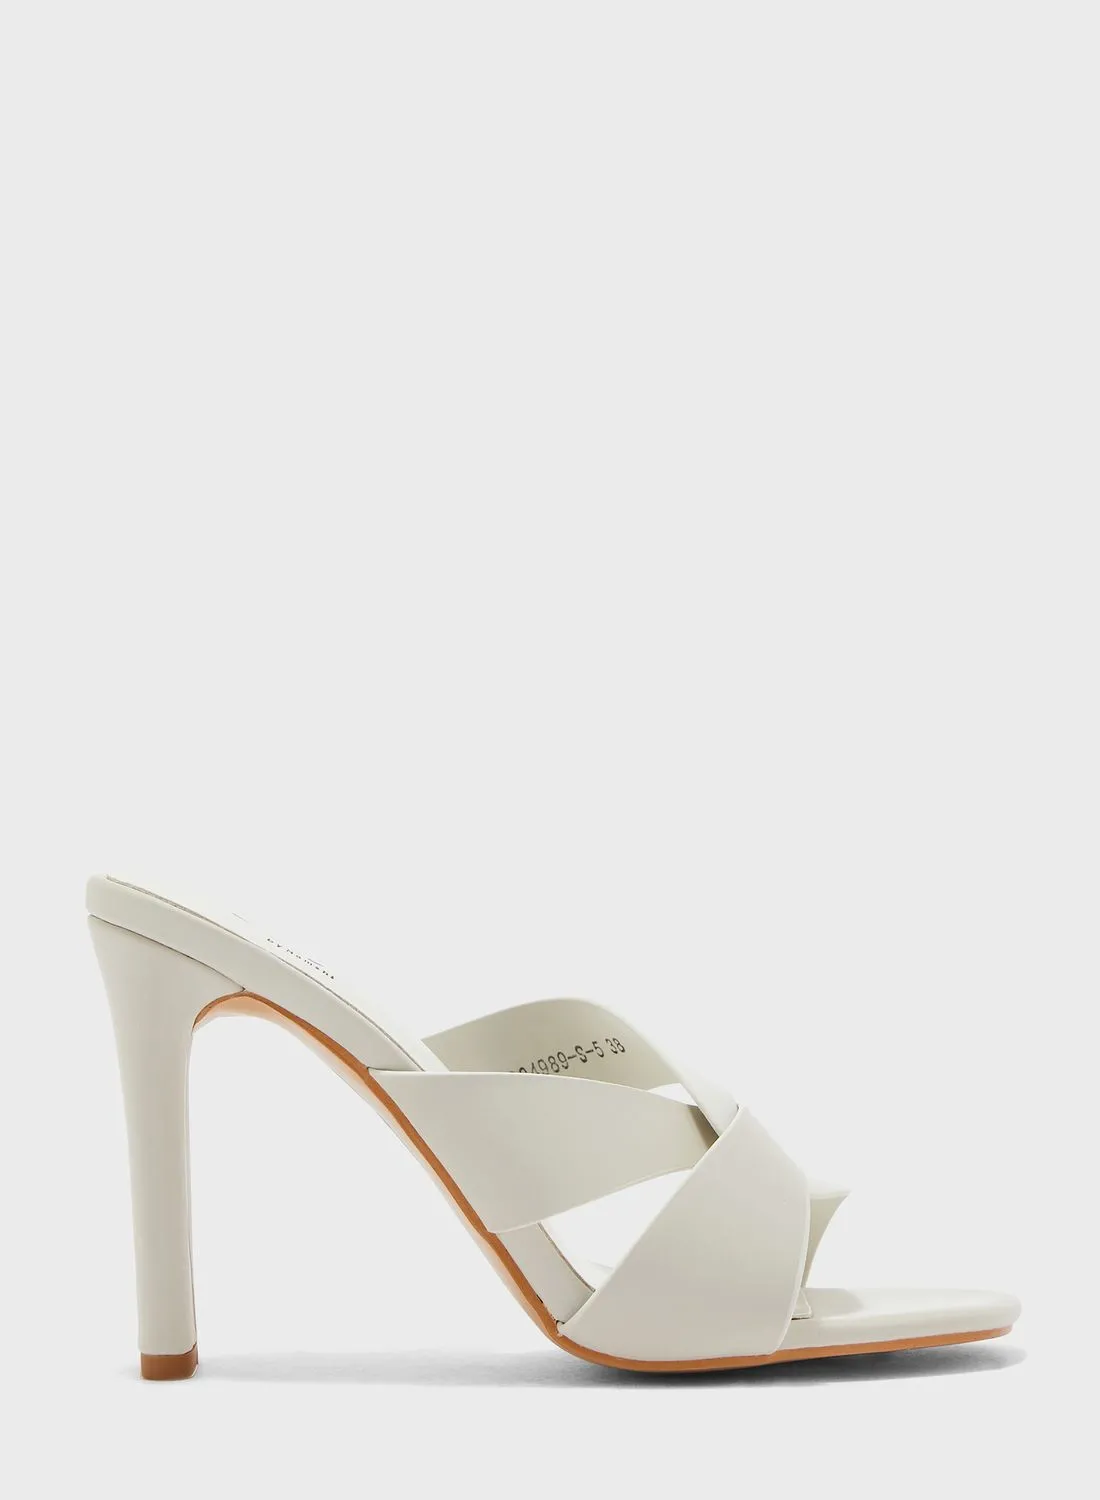 Ginger Twisted Front Mule Sandal